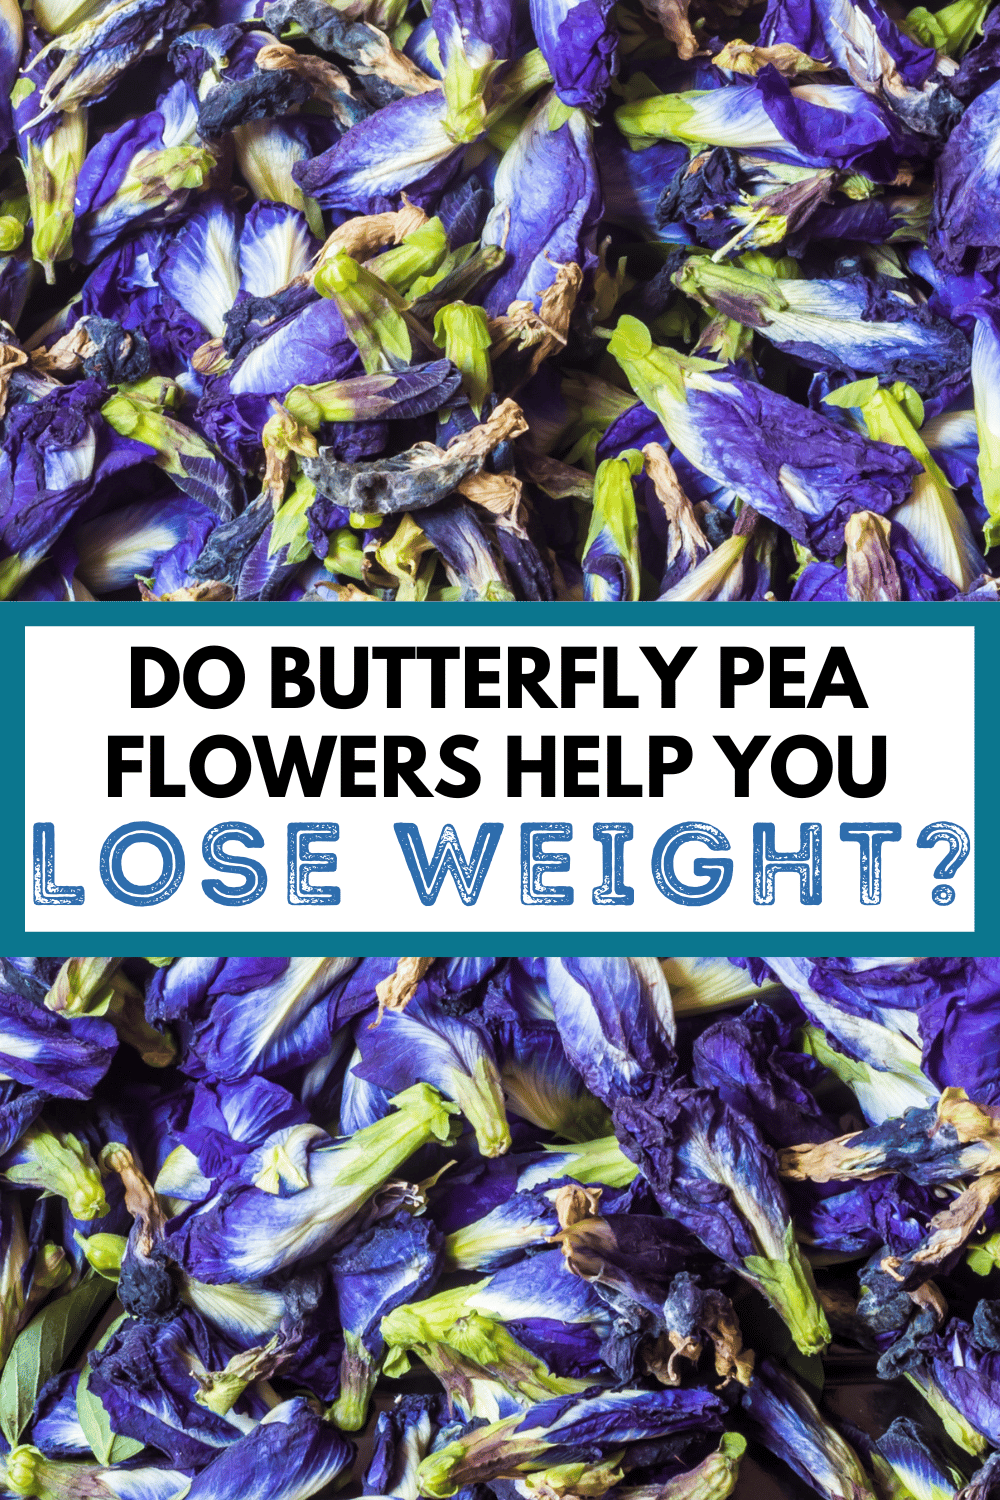 dried butterfly pea flowers with text, "do butterfly pea flowers help you lose weight?"